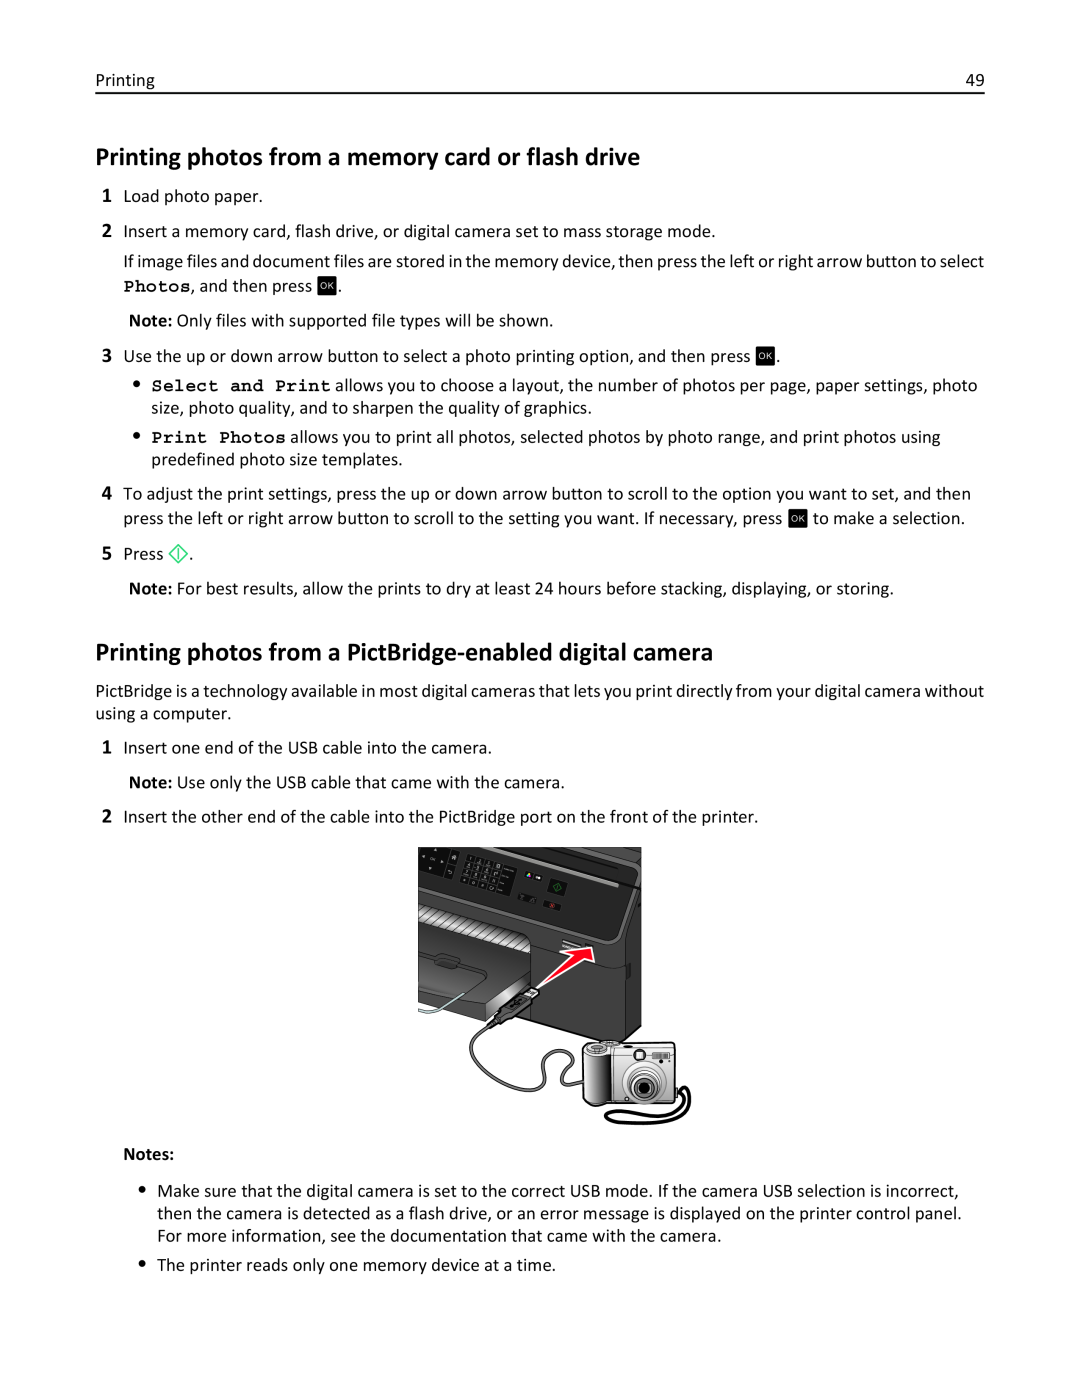 Lexmark PRO4000C, 90P3000 manual Printing photos from a memory card or flash drive 